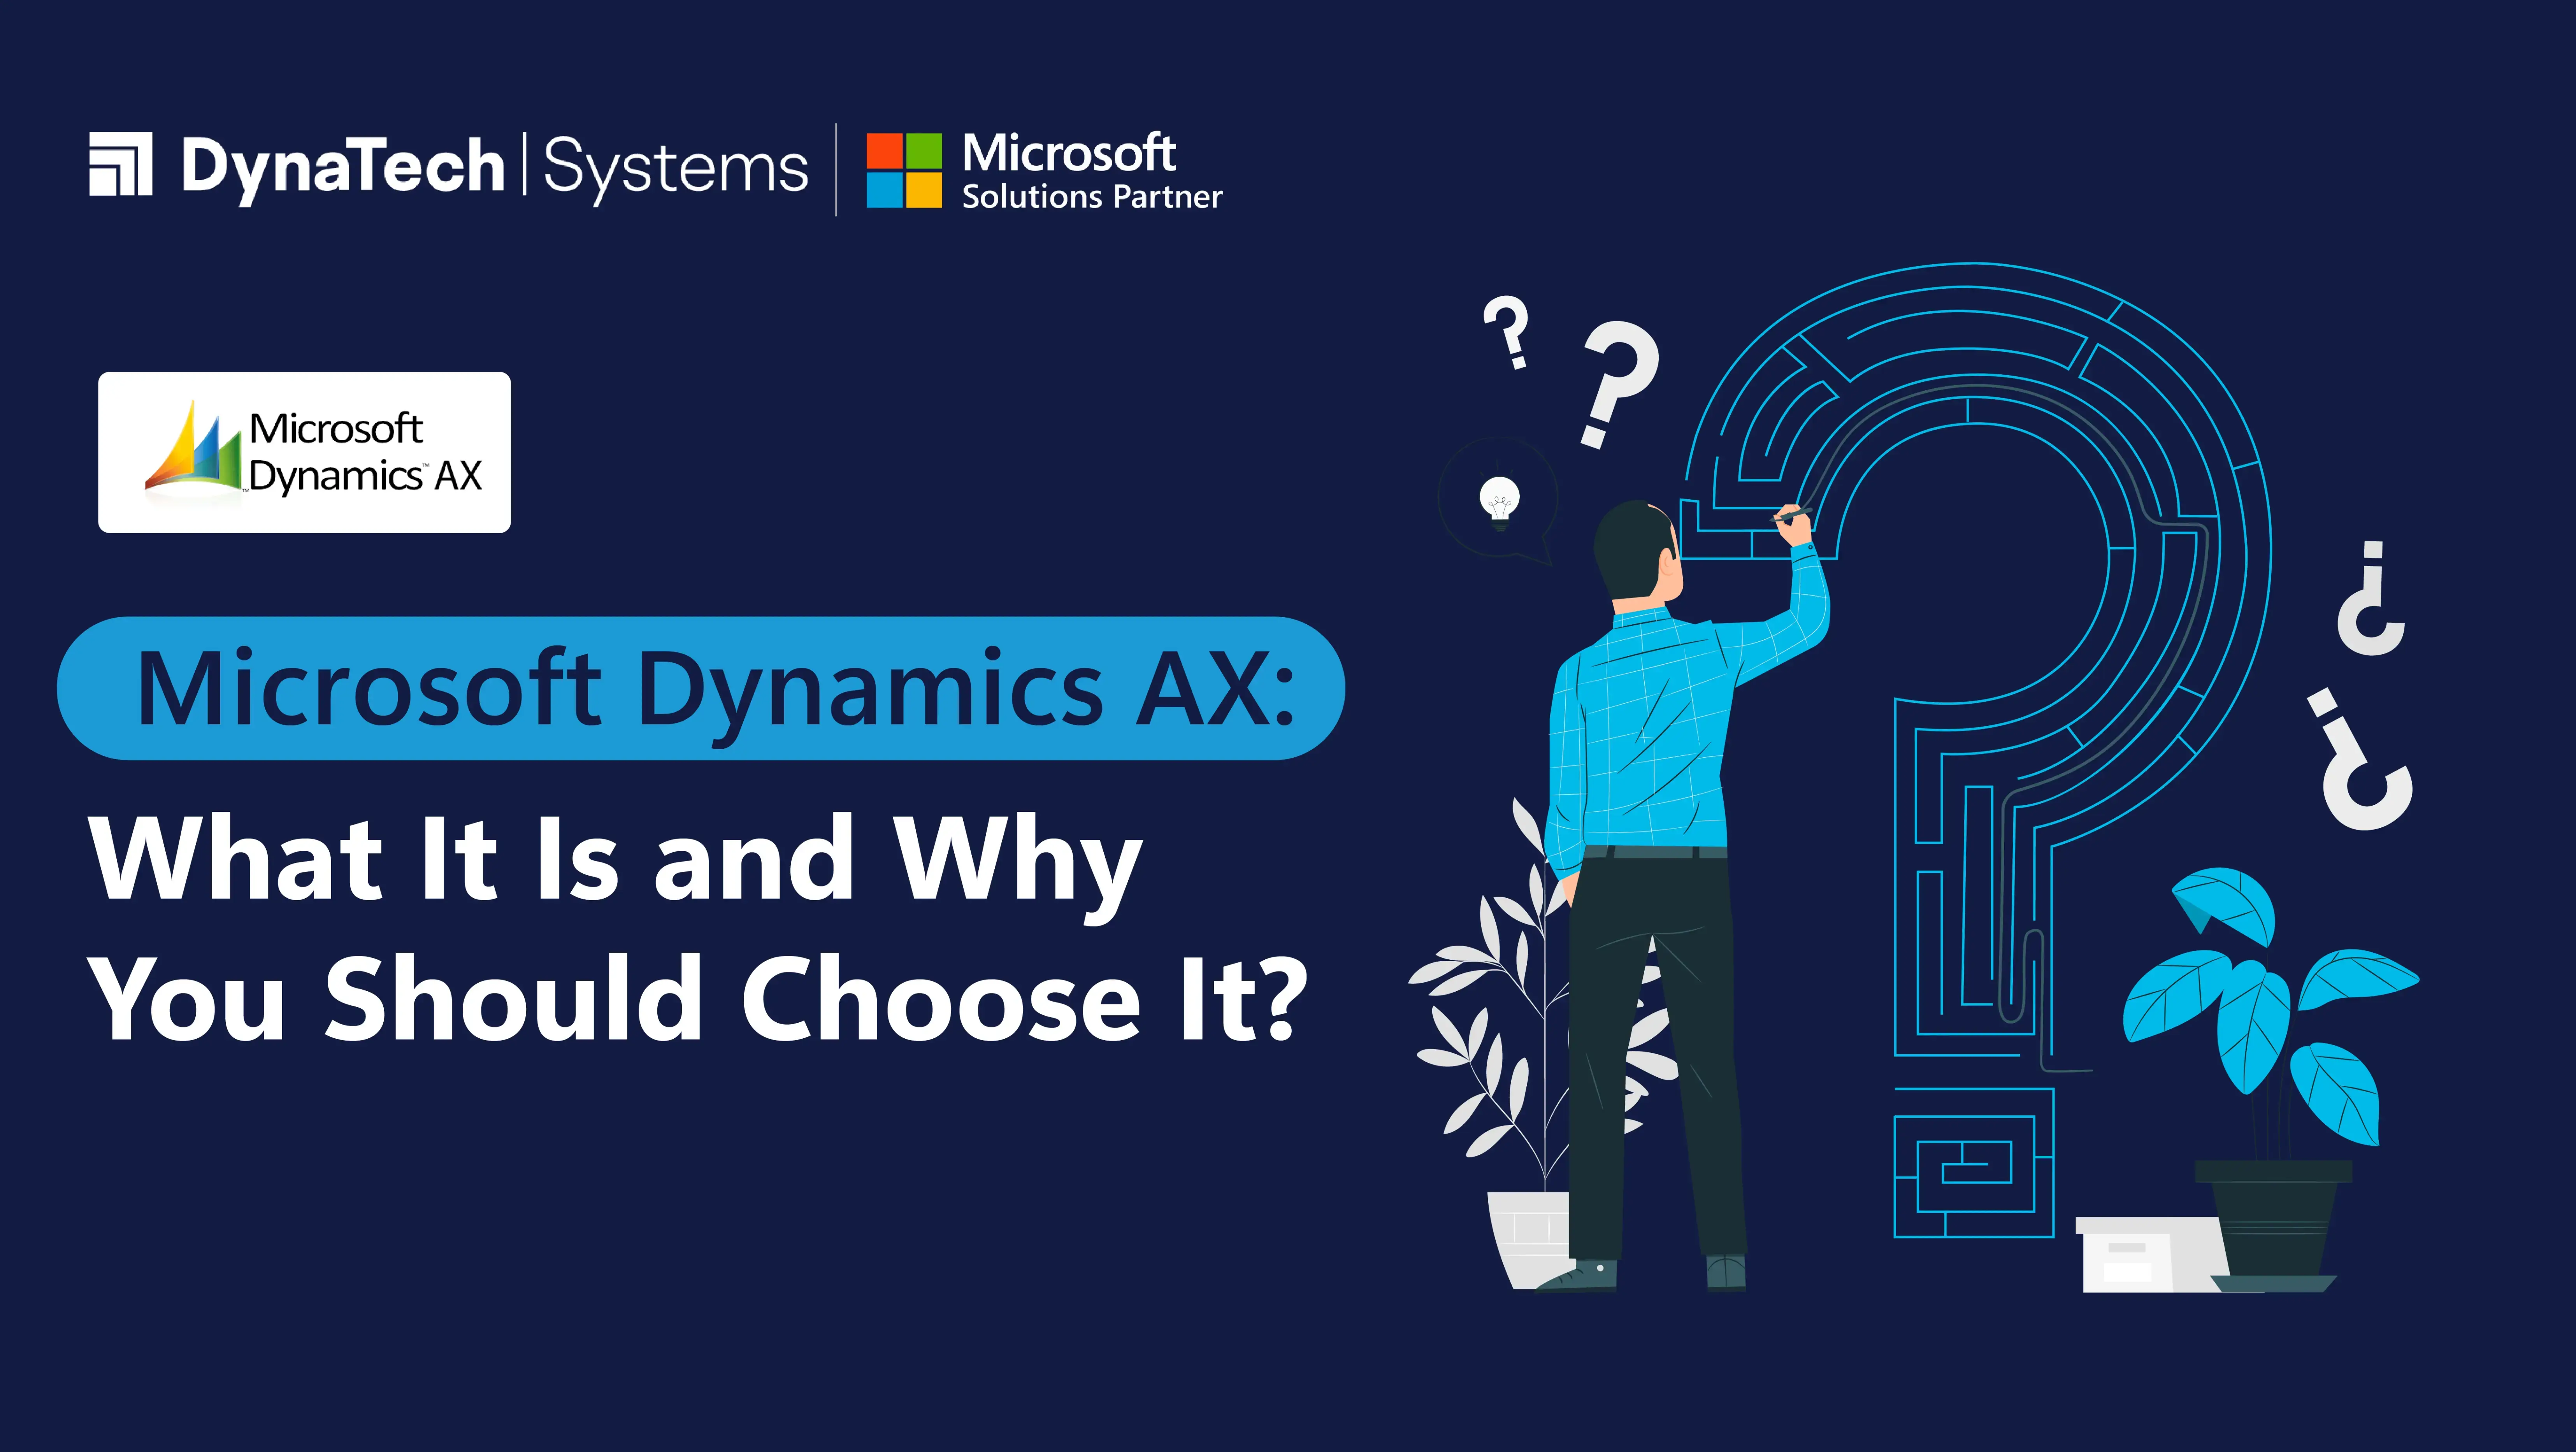 Microsoft Dynamics AX: What It Is and Why You Should Choose It